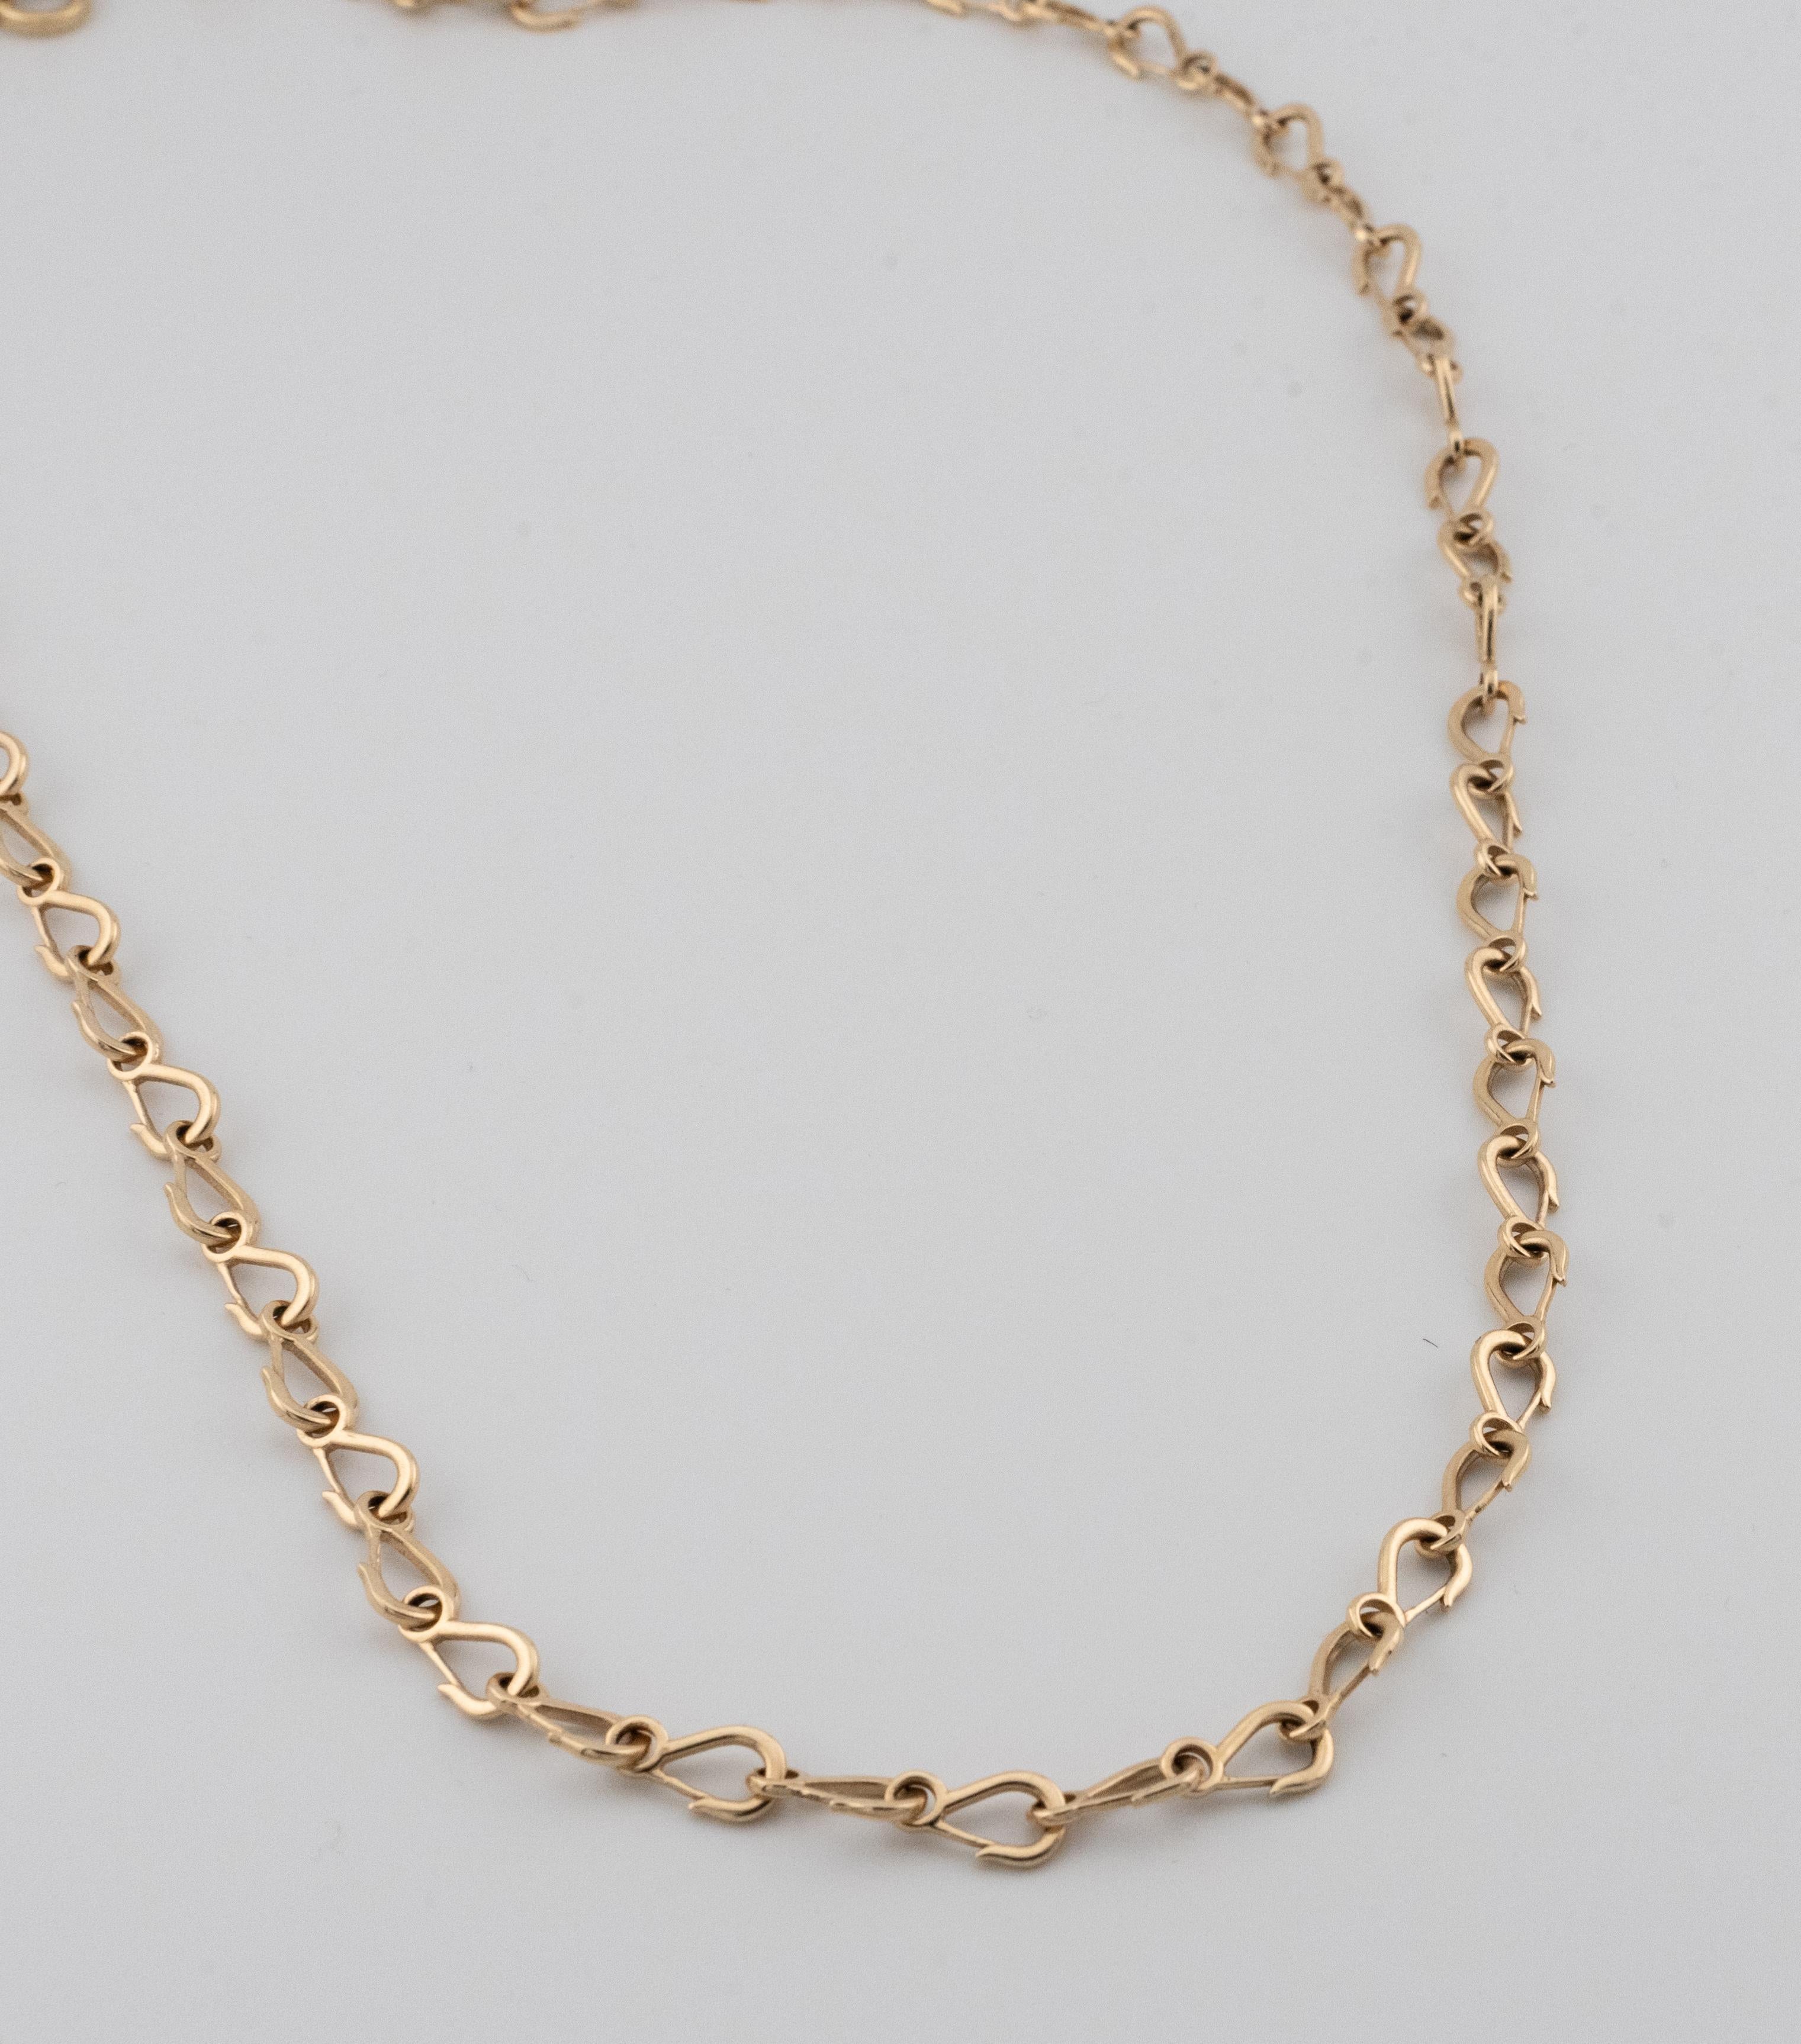 Grunfeld link 14k yellow gold necklace.
26” in length. Each link is hand welded together by artisans in Los Angeles, California. 27 grams. These links are one of a kind and cannot be found in mass production anywhere. Appraisal included with